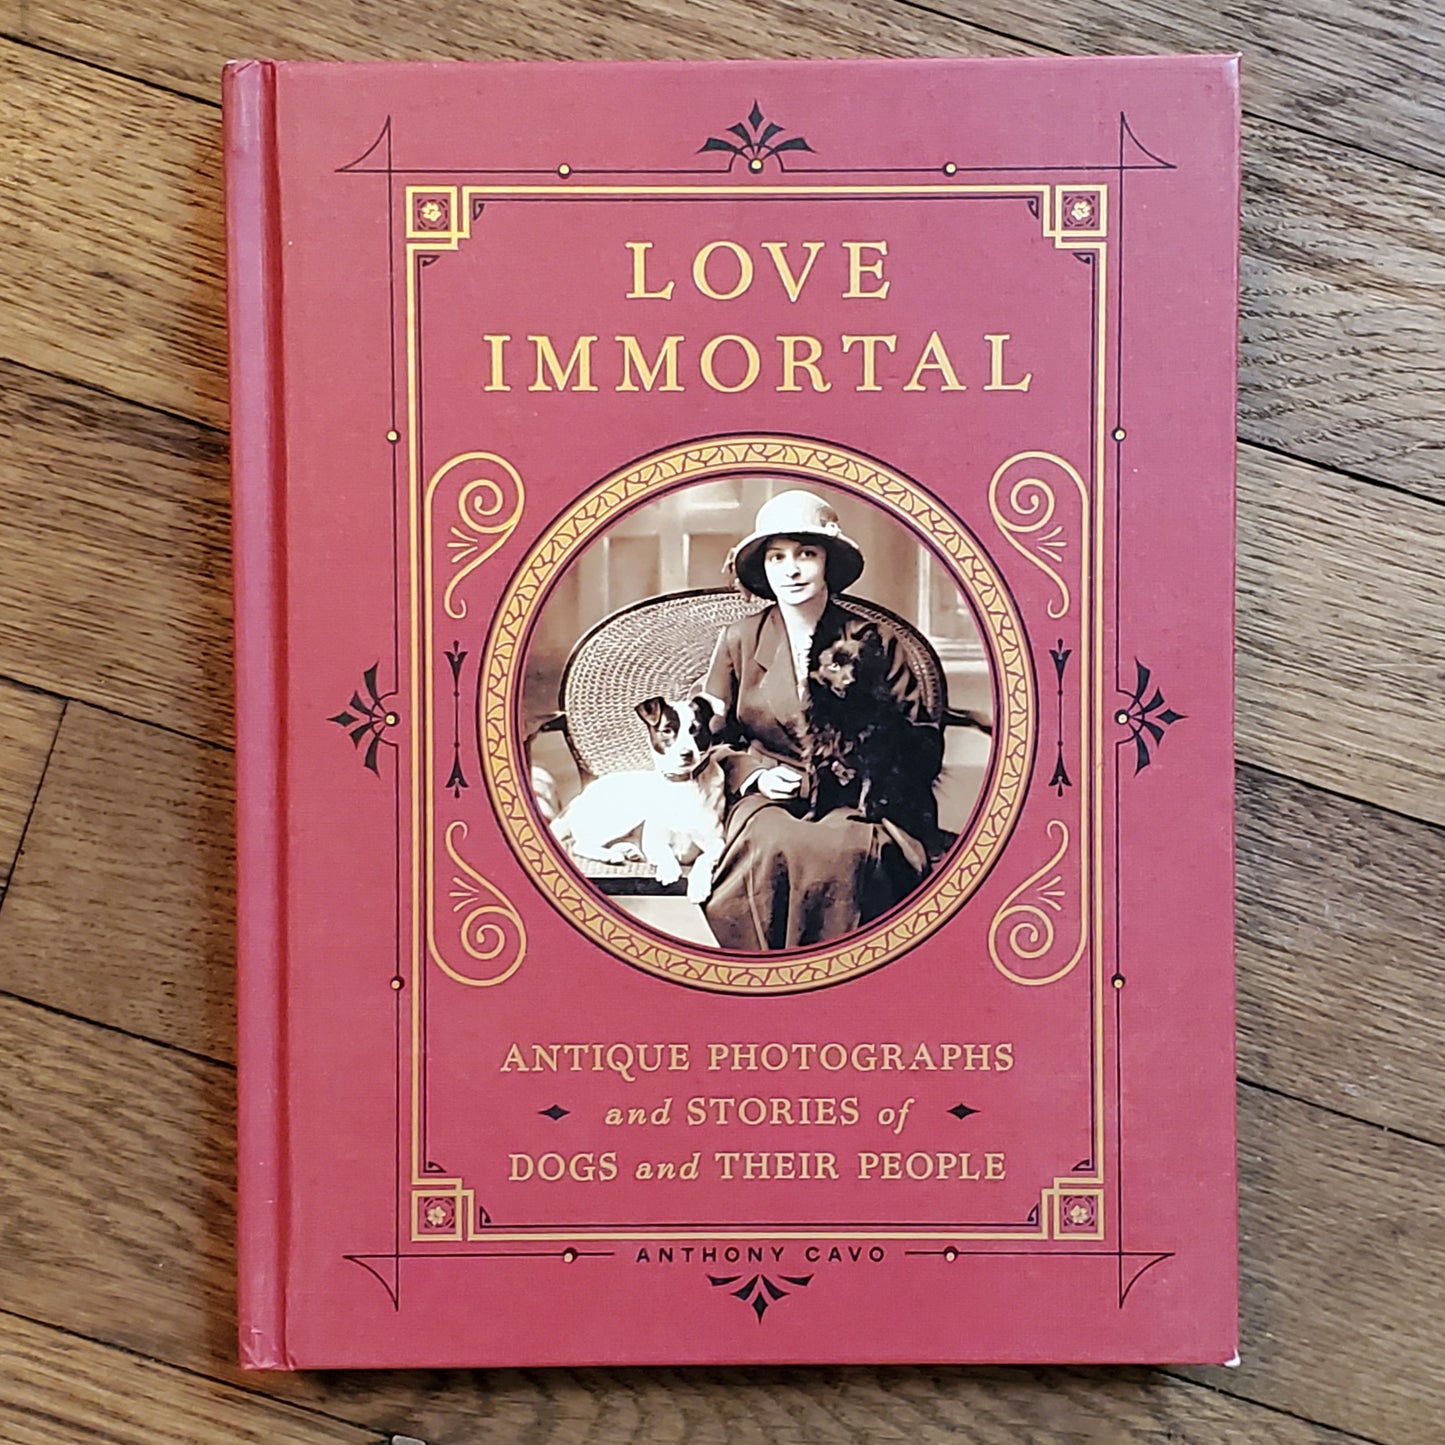 Love Immortal: Antique Photographs and Stories of Dogs and Their People